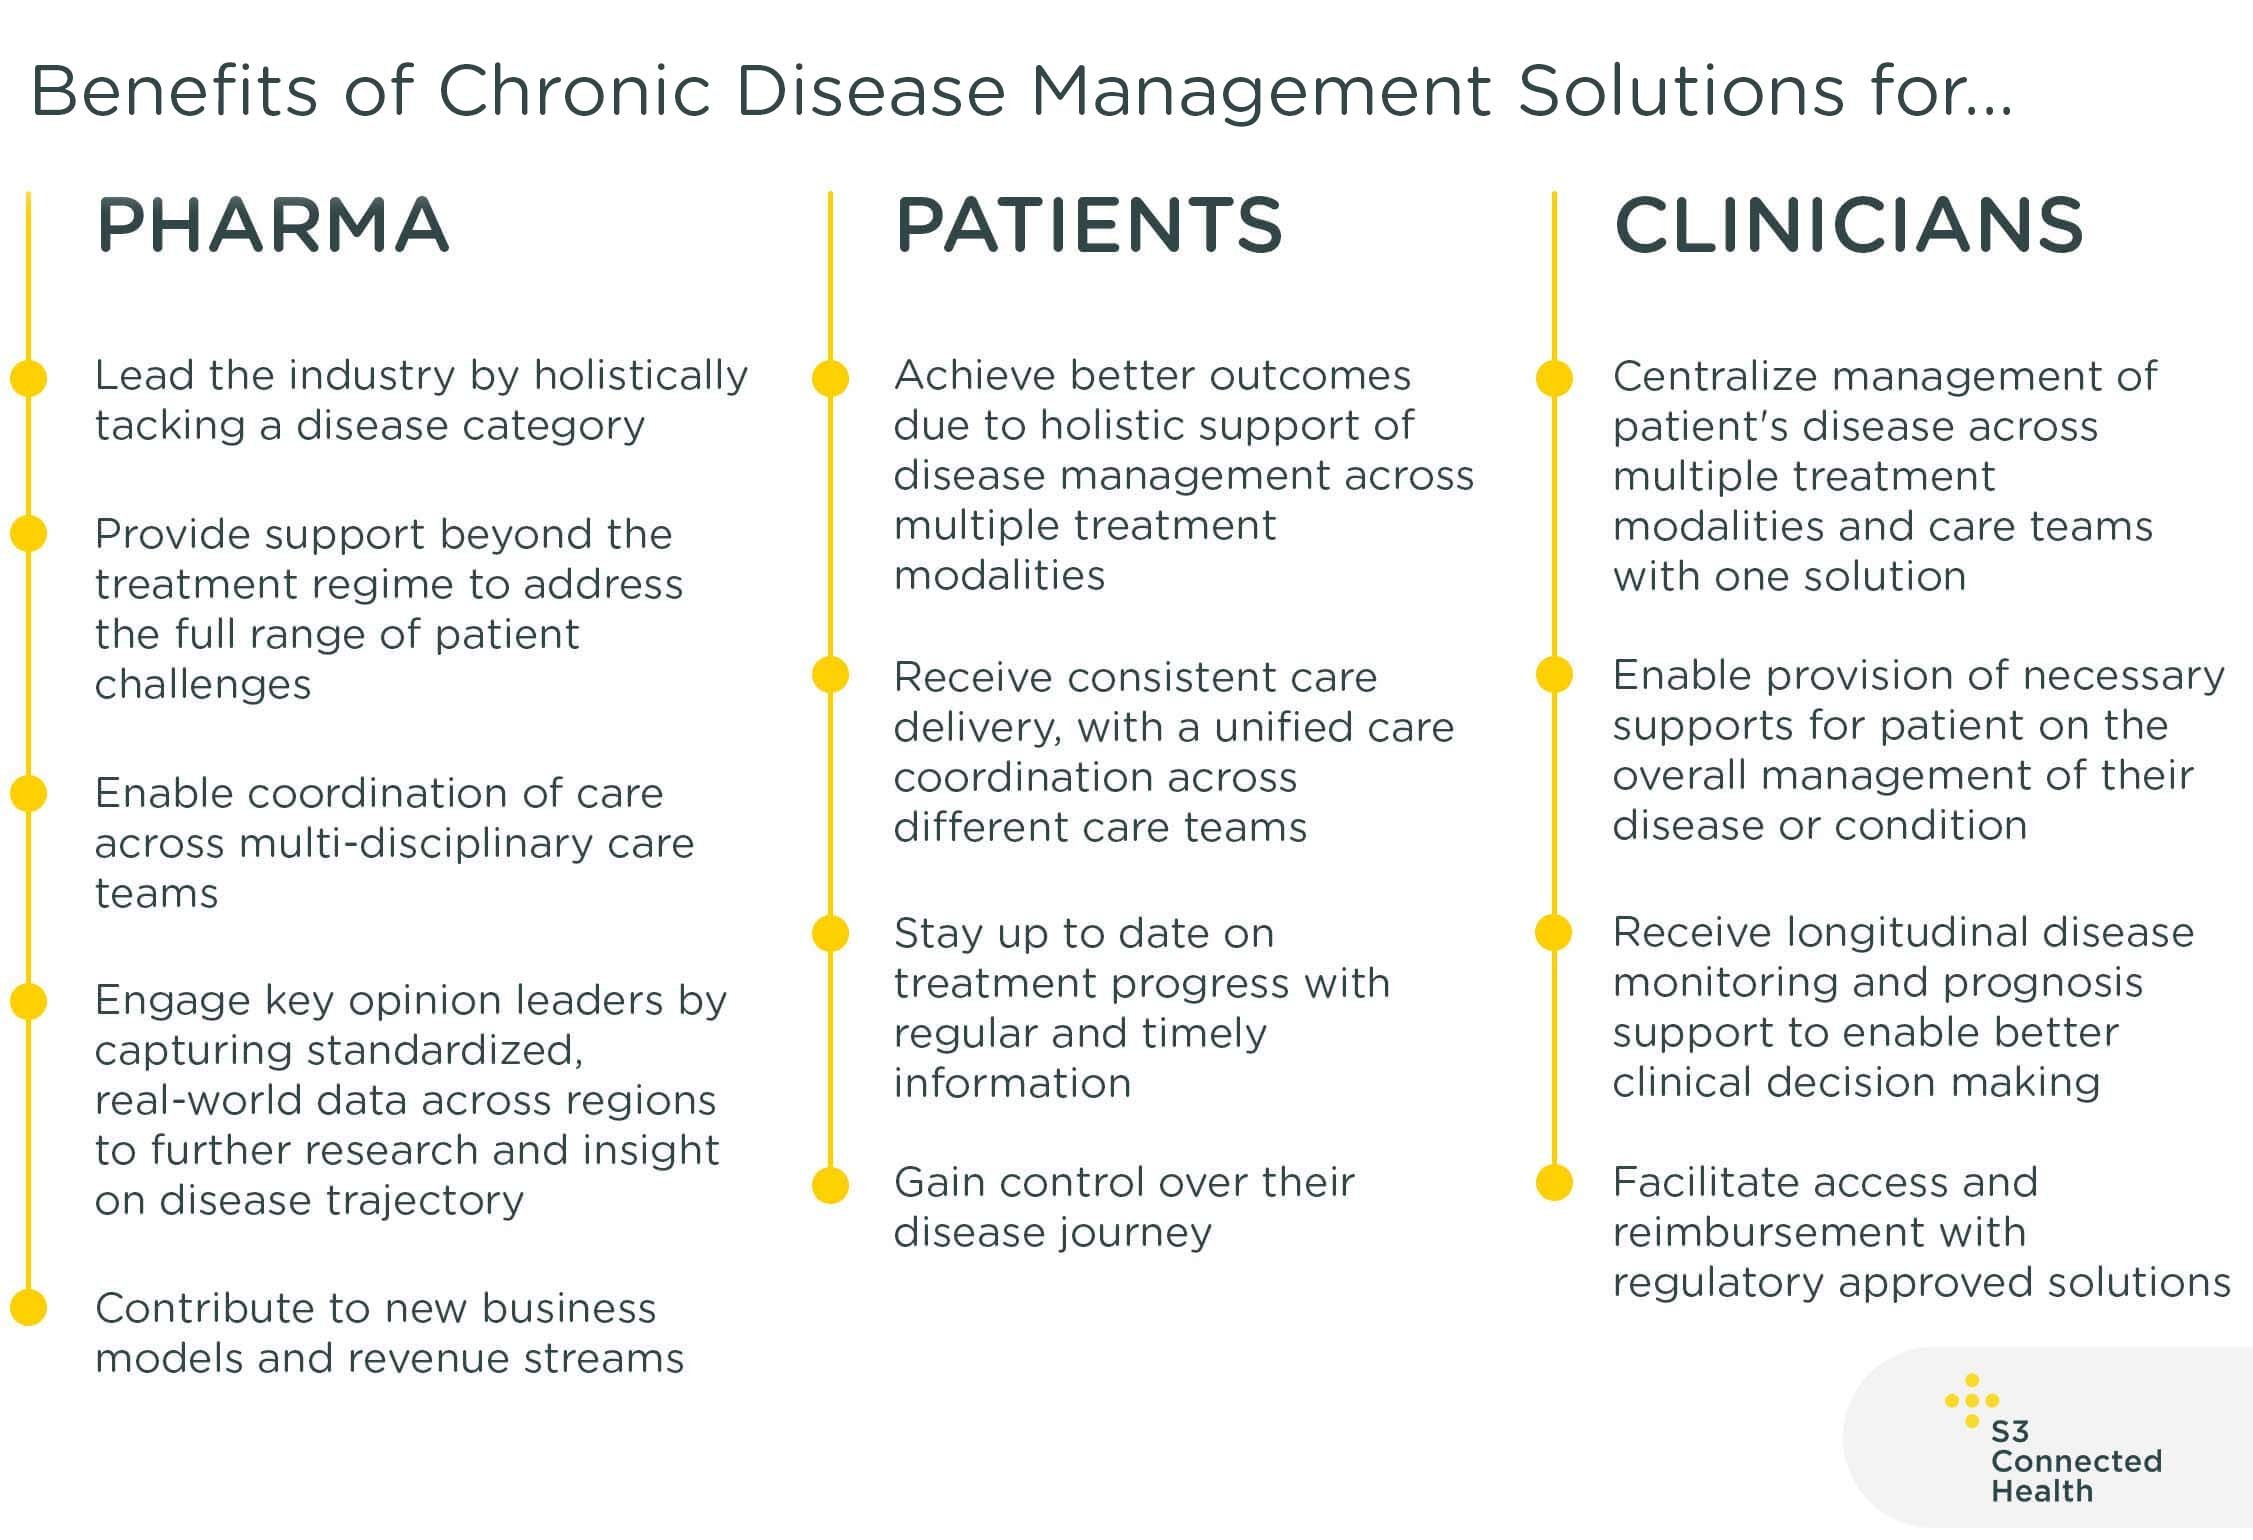 Digital health solutions for chronic disease management benefits - S3 Connected Health